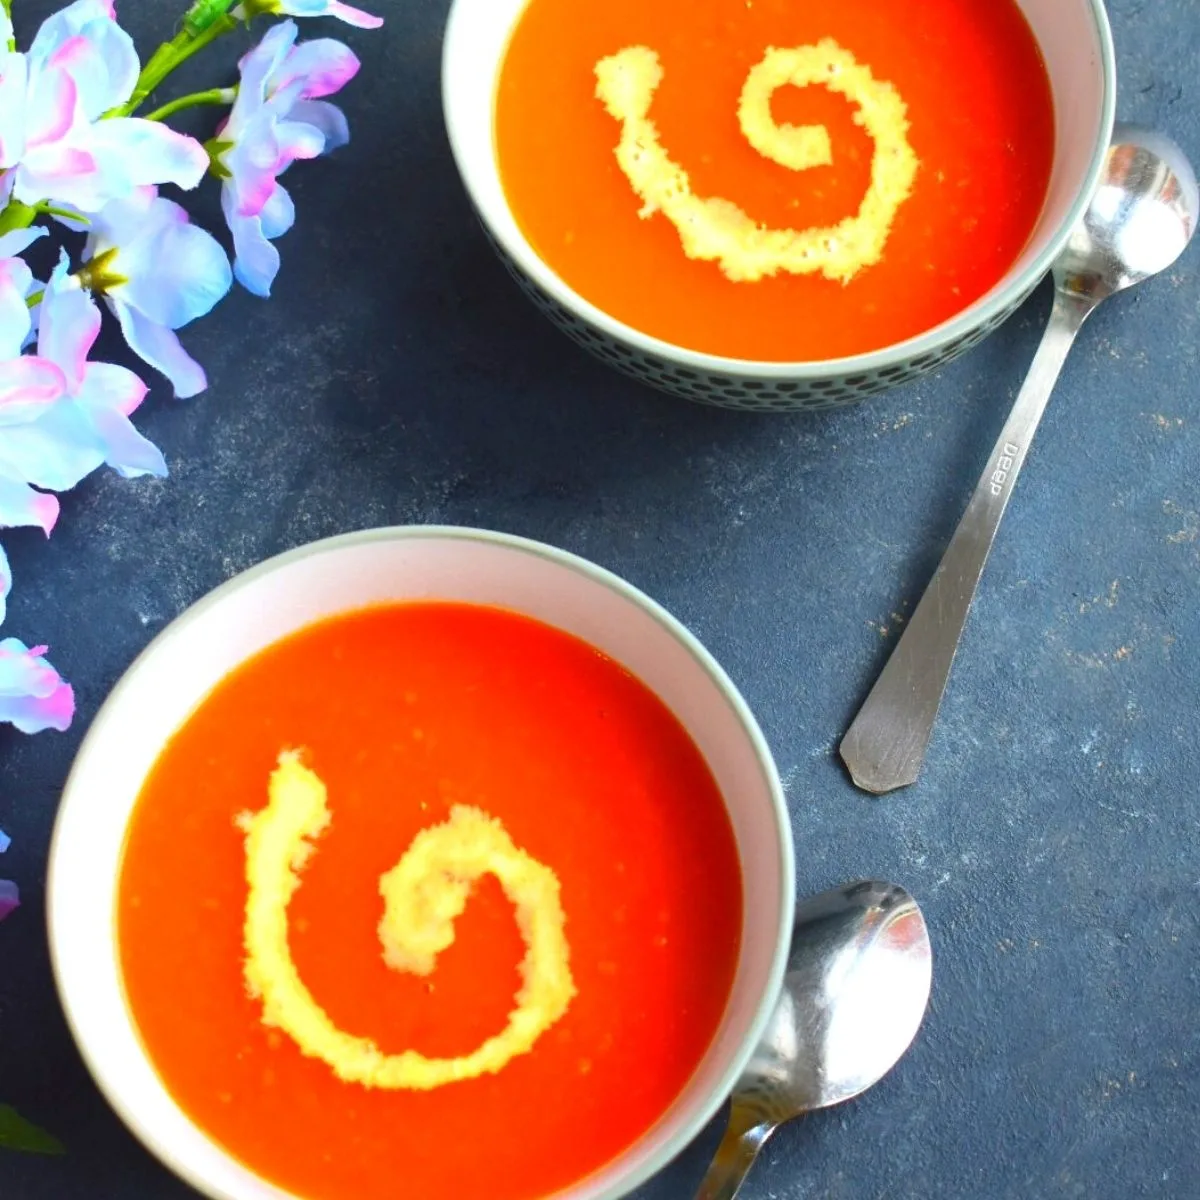 2 Bowls of Soup, with a bit of cream garnish. Seen along side are some artificial flowers